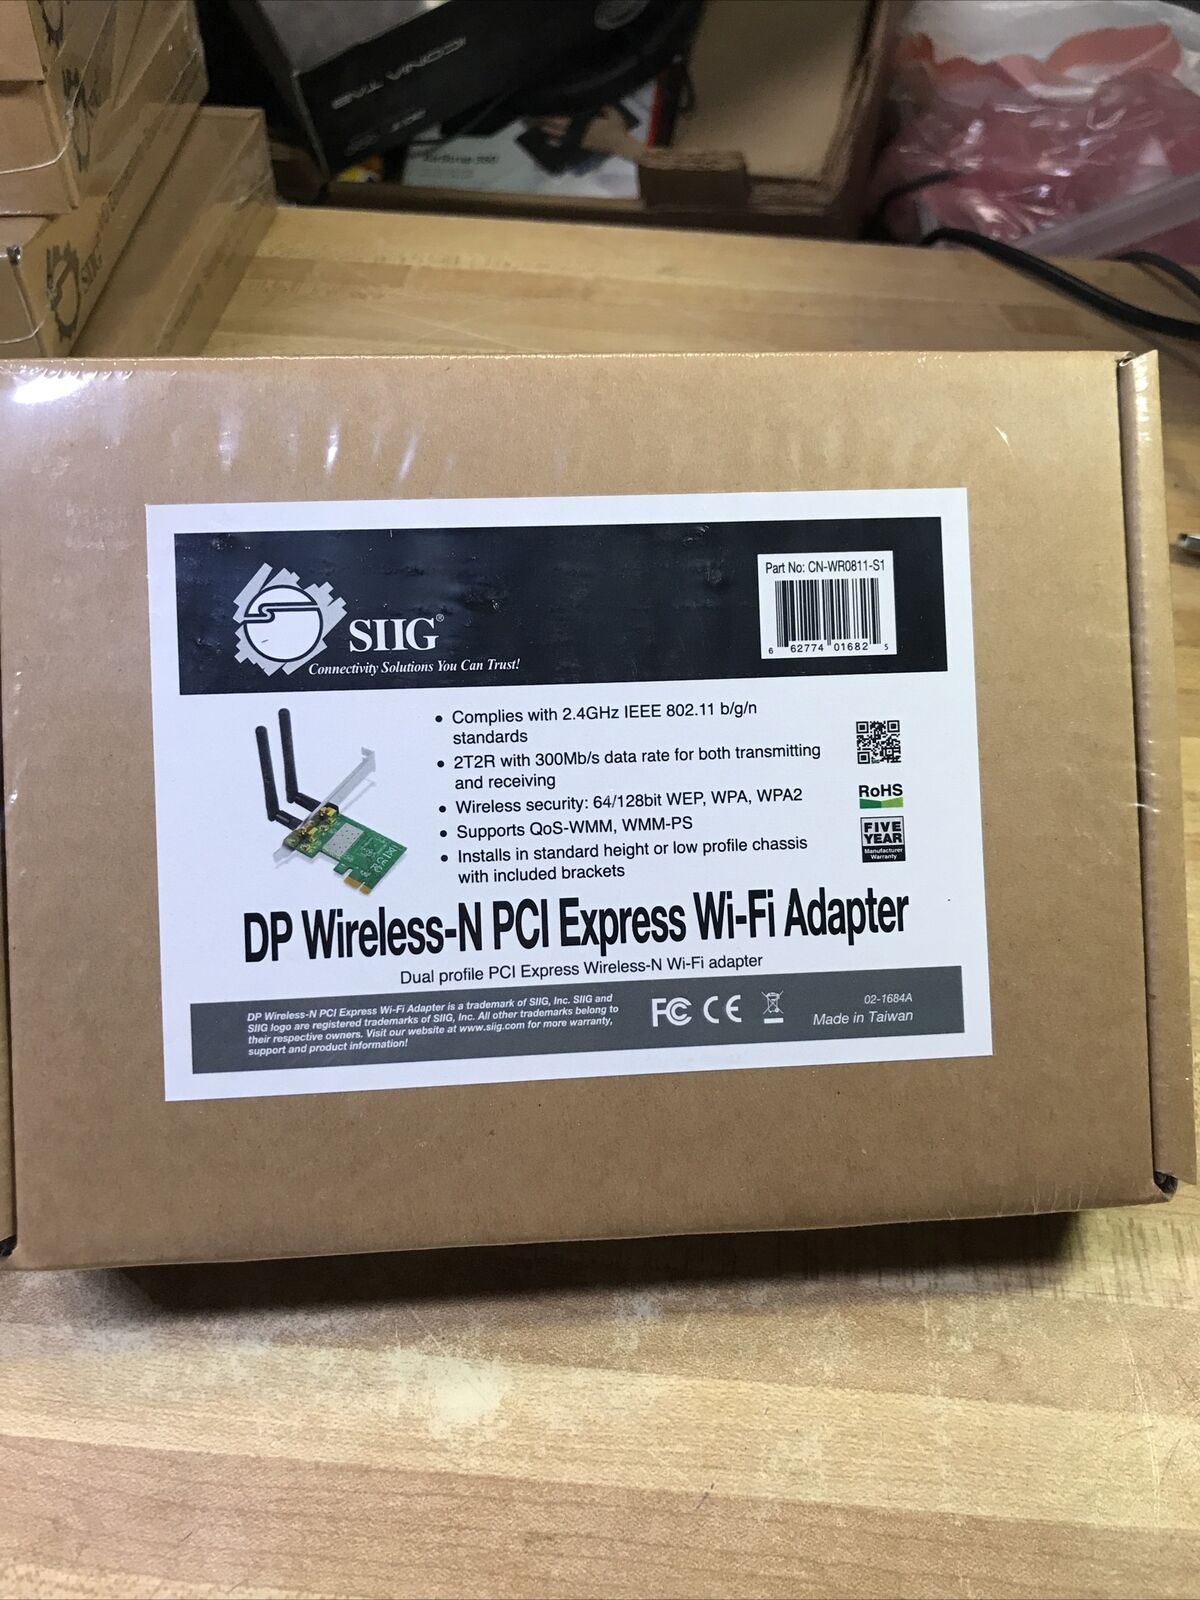 SIIG DP Wireless-N PCI Express Wi-Fi Adapter Dual Antenna 2.4GHz (CN-WR0811-S1)